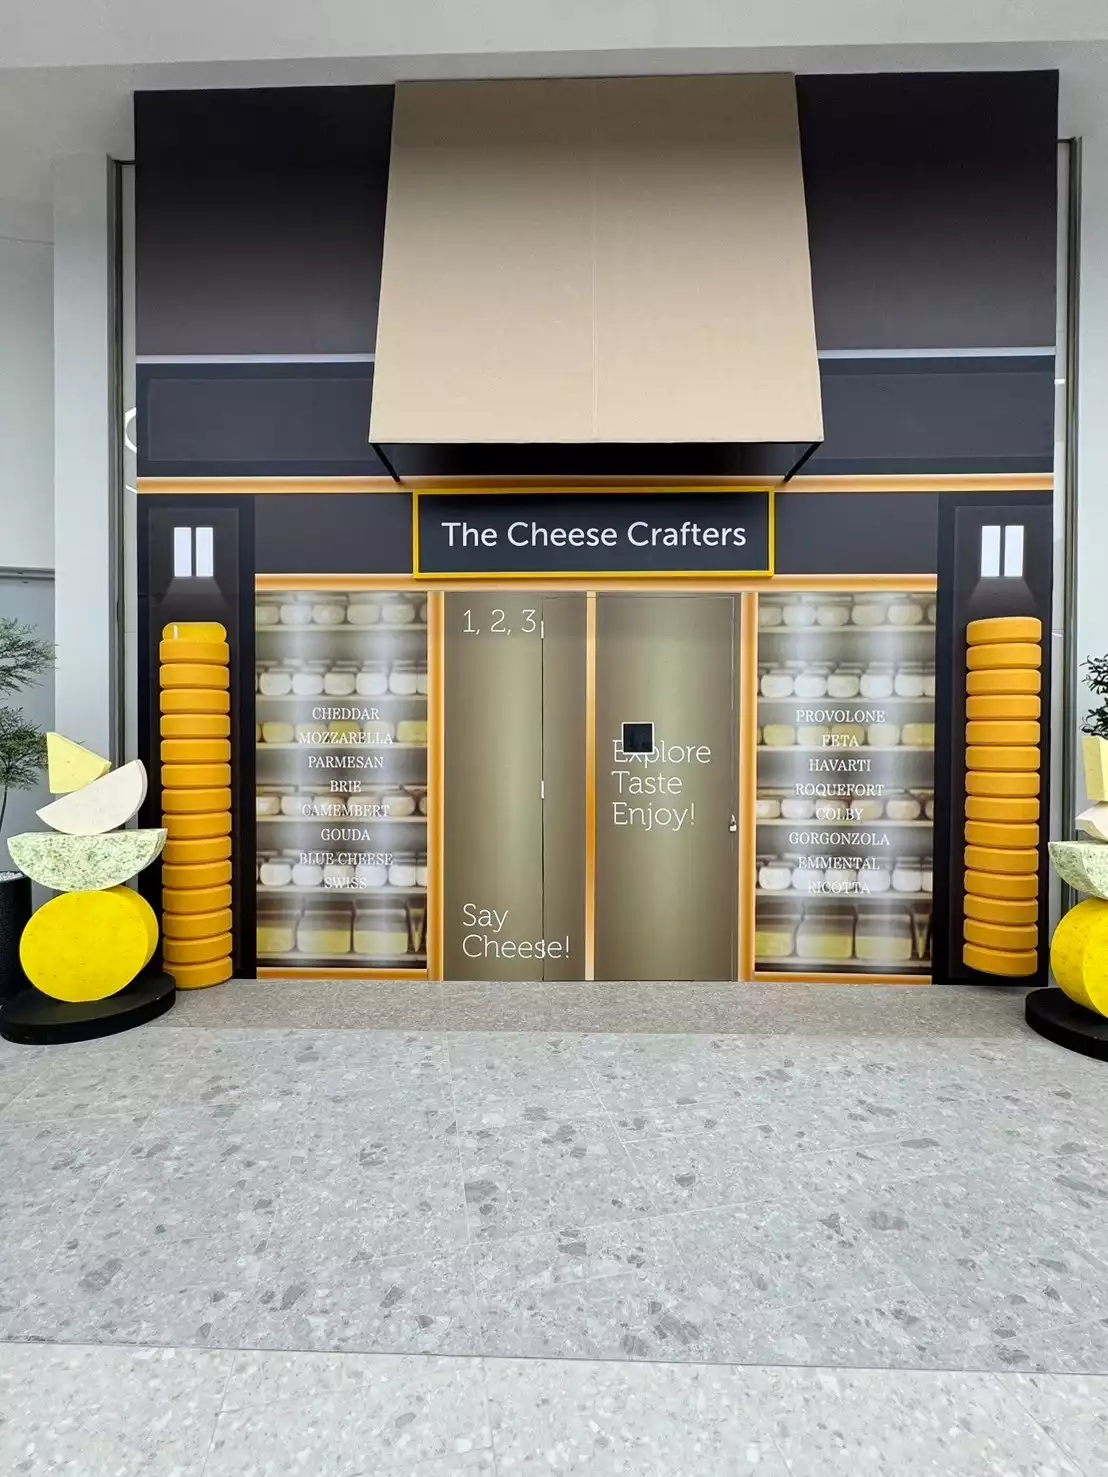 The Cheese Crafters